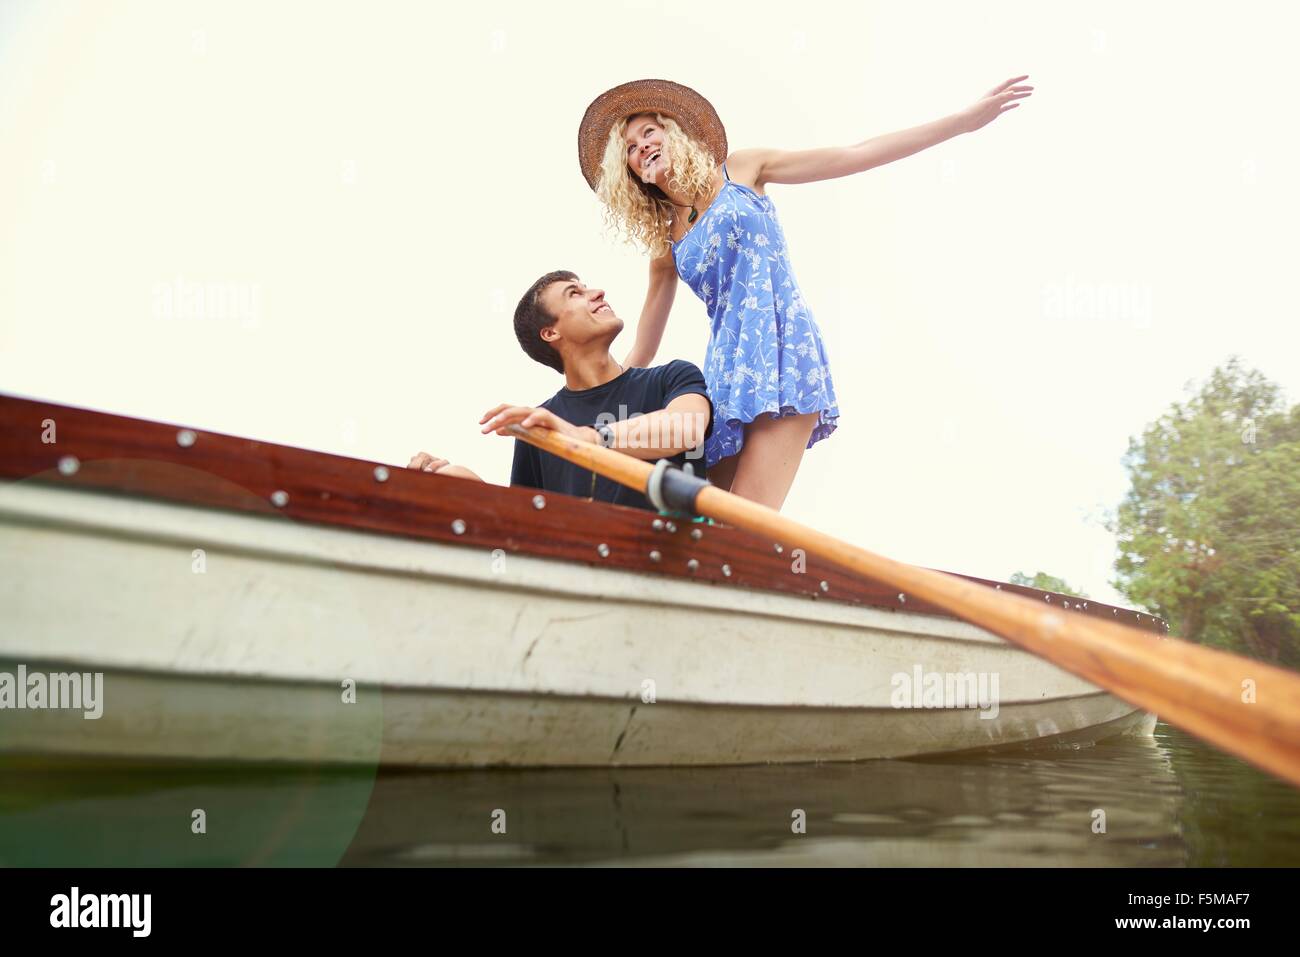 Low angle view of young woman standing in rowing boat on river Stock Photo